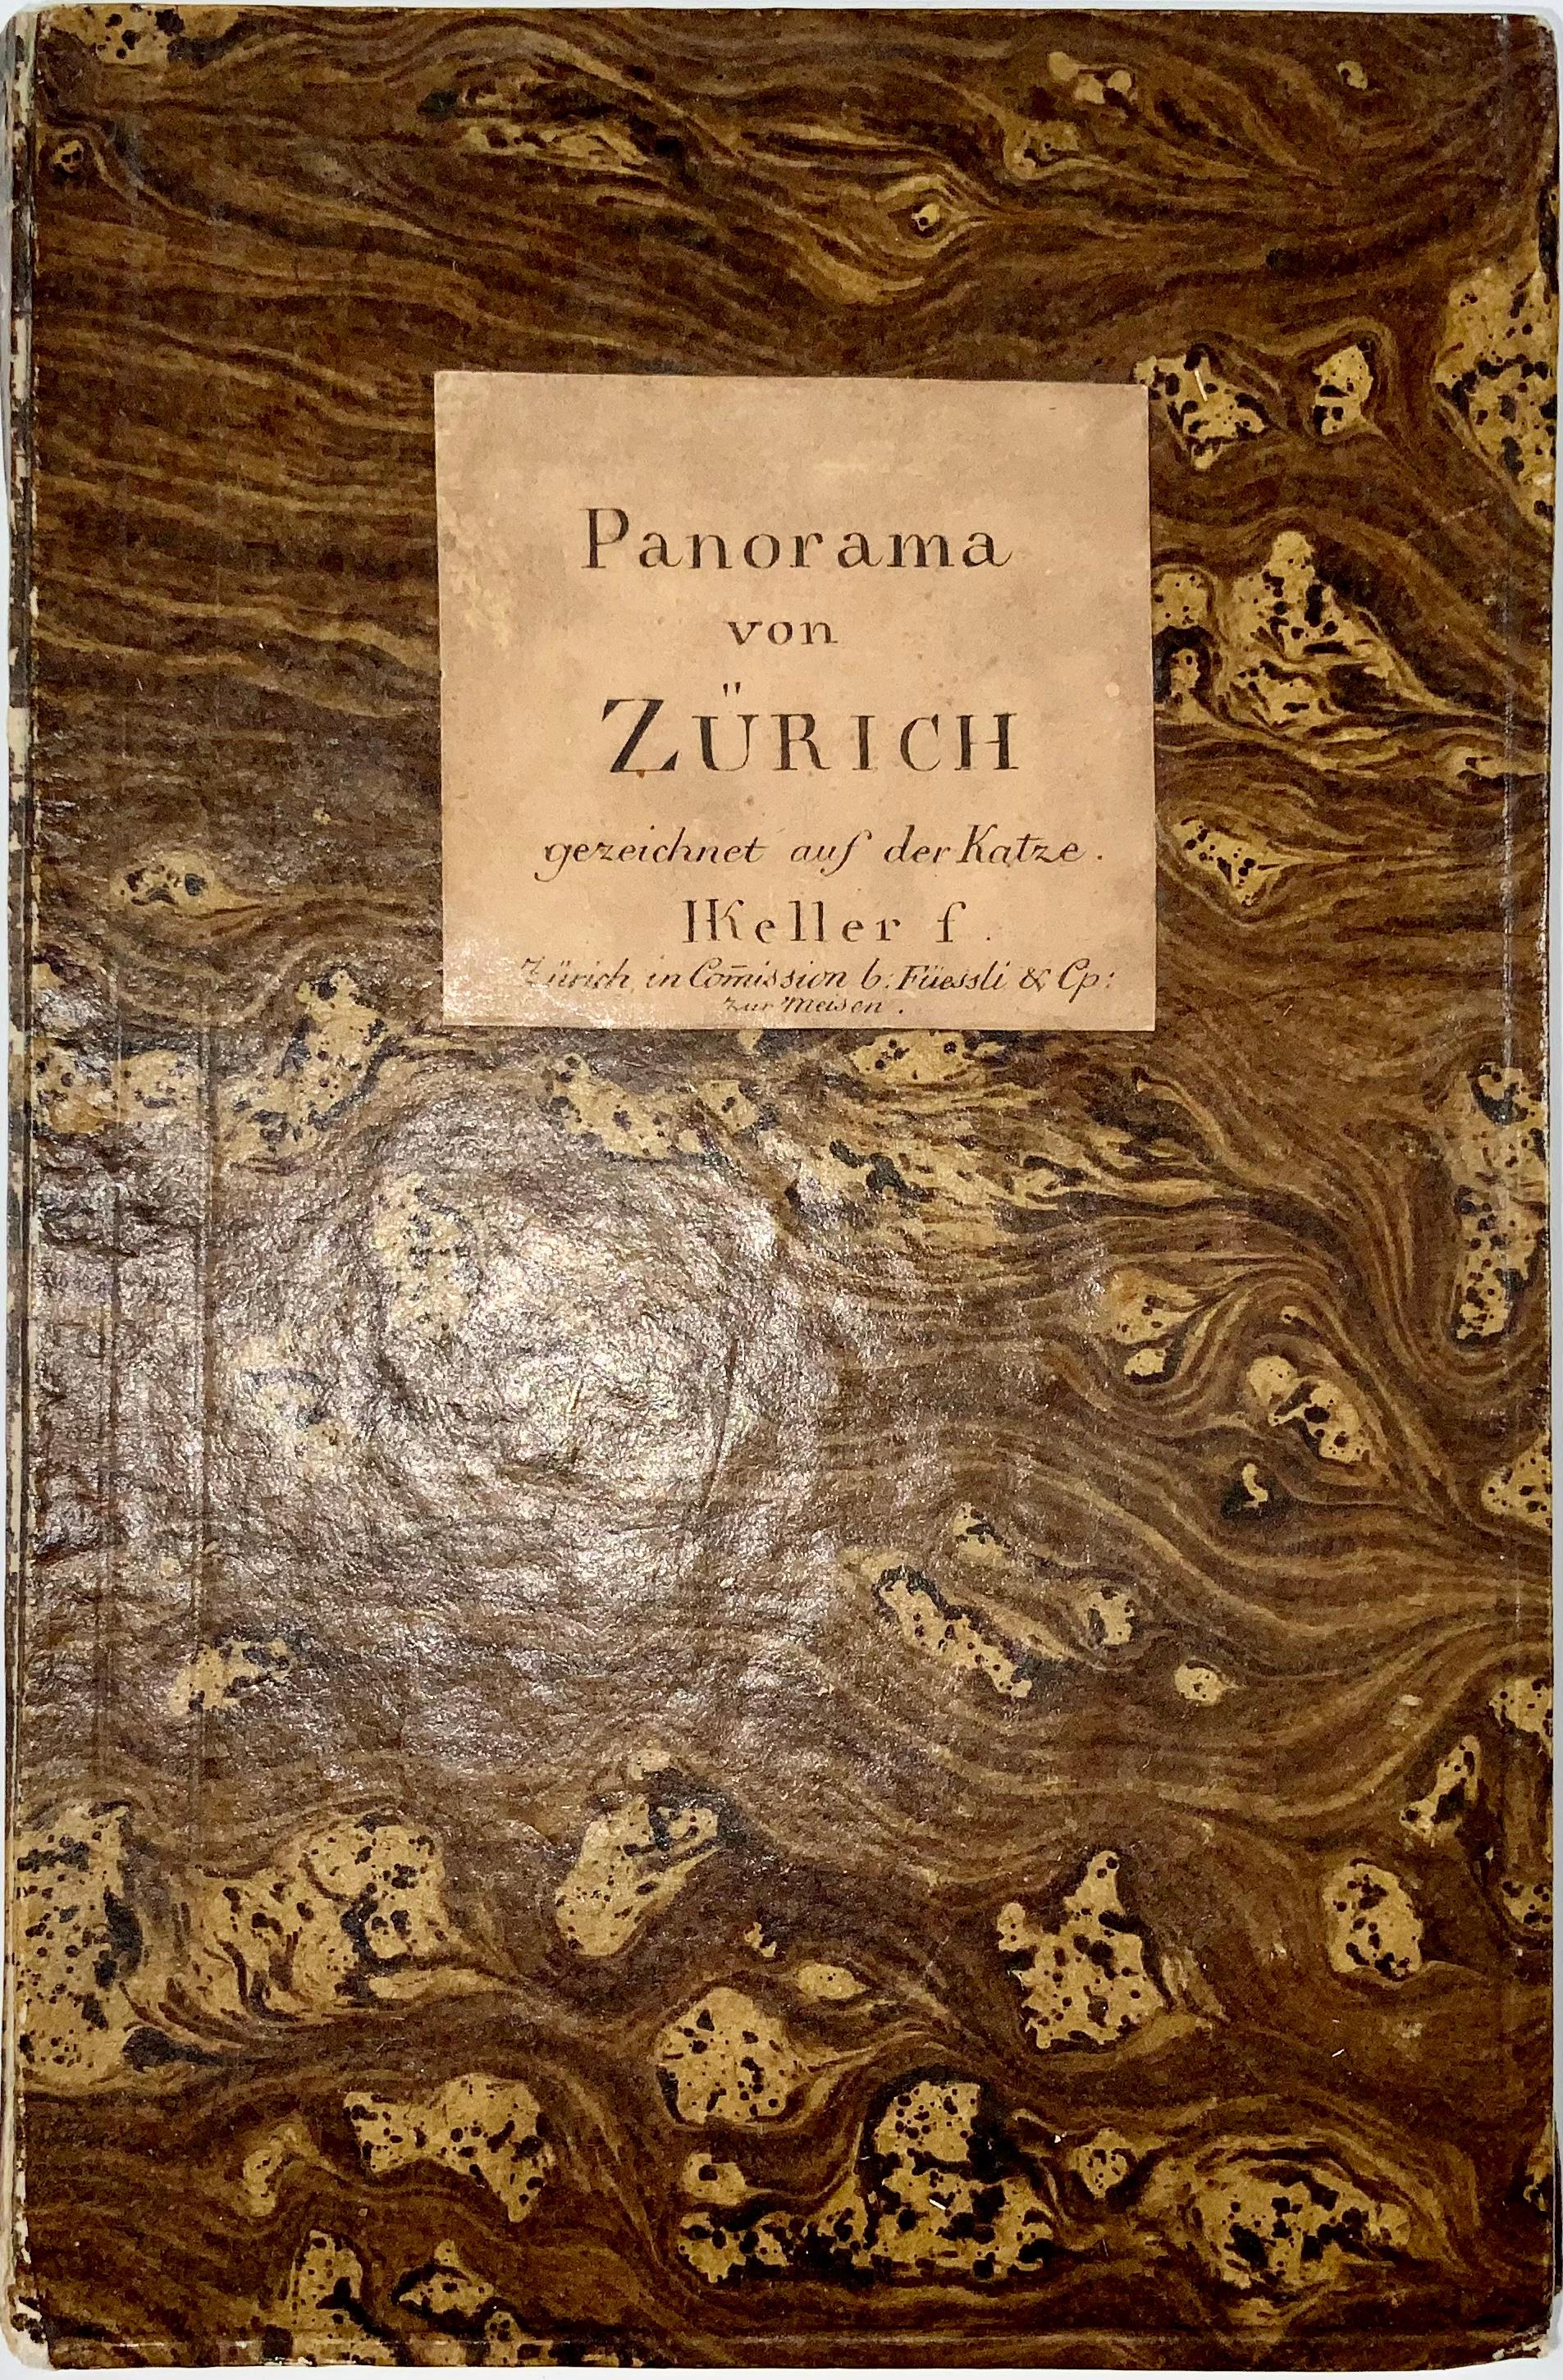 EXQUISITE PANORAMA OF THE CITY OF ZURICH IN AQUATINT

Heinrich Keller

8,2 x 139 cm (3,2 x 54,7 in)

Zurich, 1810. 

Fan-folded, partly hand coloured (grey and green tones) aquatint in contemporary boards. Marbled boards with small printed label to